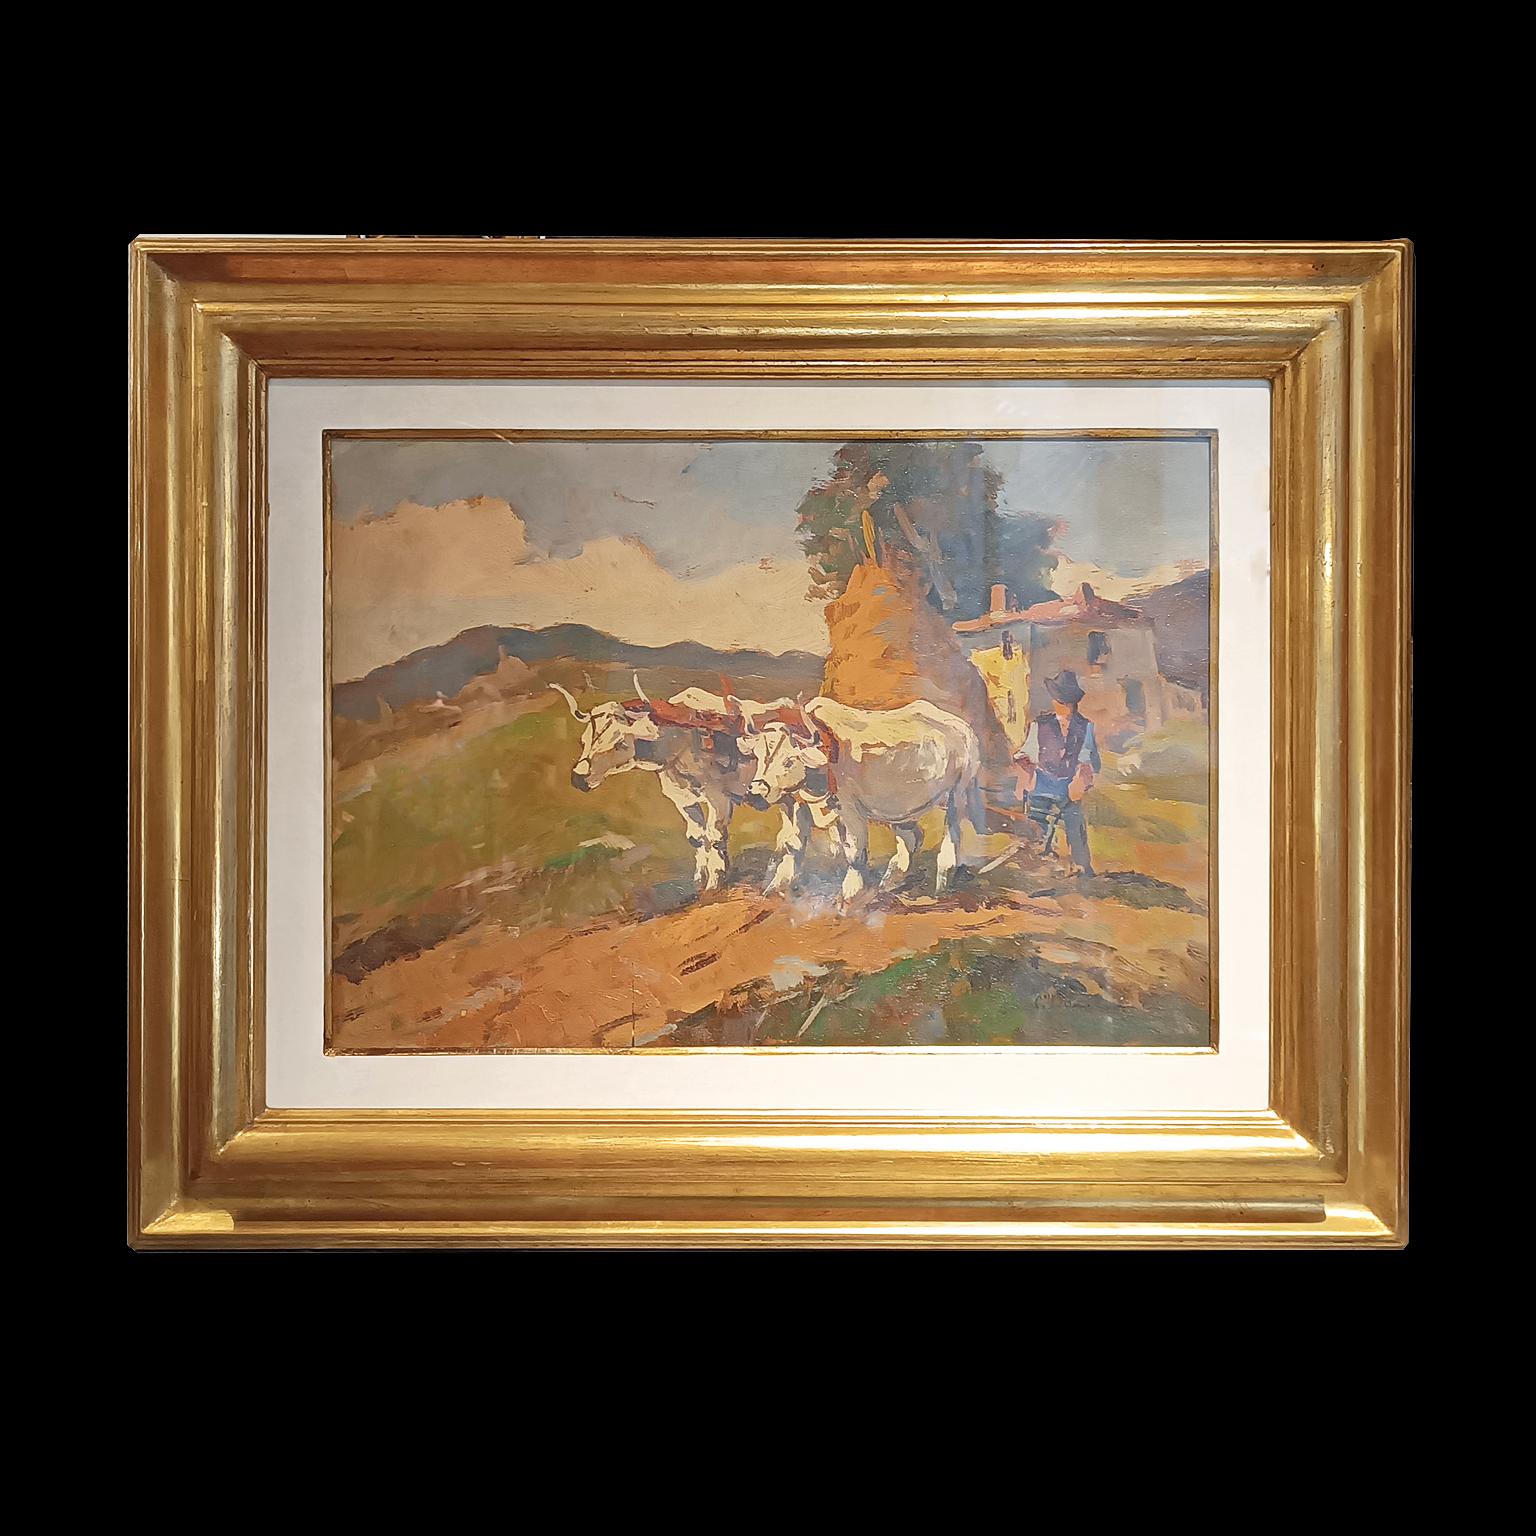 Carlo Domenici (1897-1981) was an artist deeply passionate about nature and the landscapes of Tuscany. He inherited this love from the great masters, such as Giovanni Fattori, and produced both small and large landscape masterpieces. His paintings